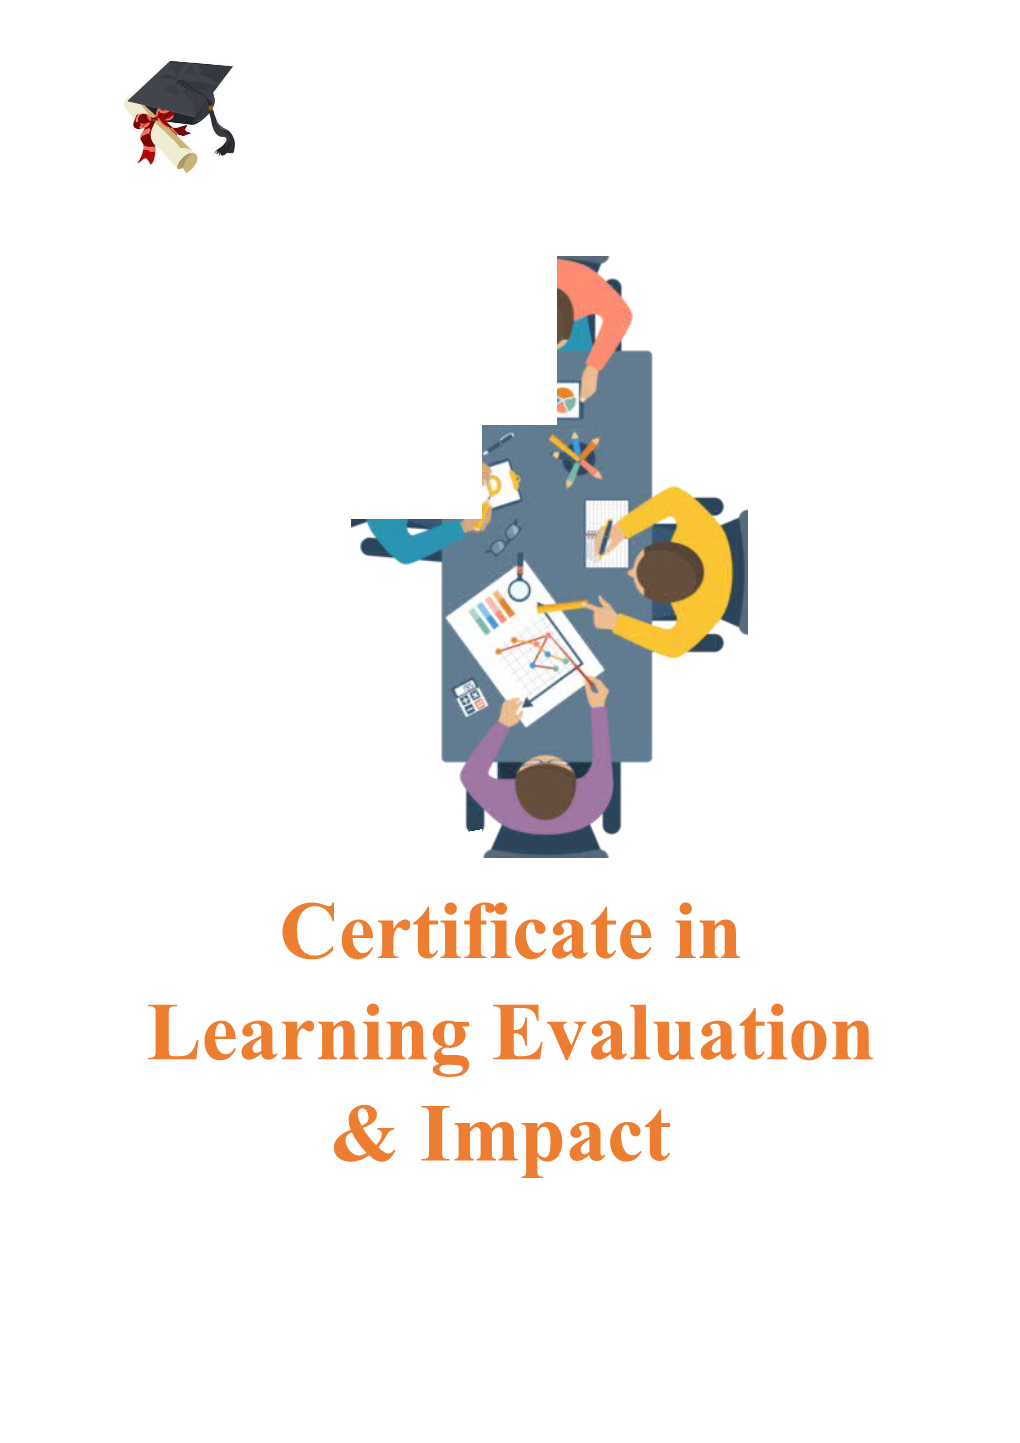 Certificate in Learning Evaluation & Impact